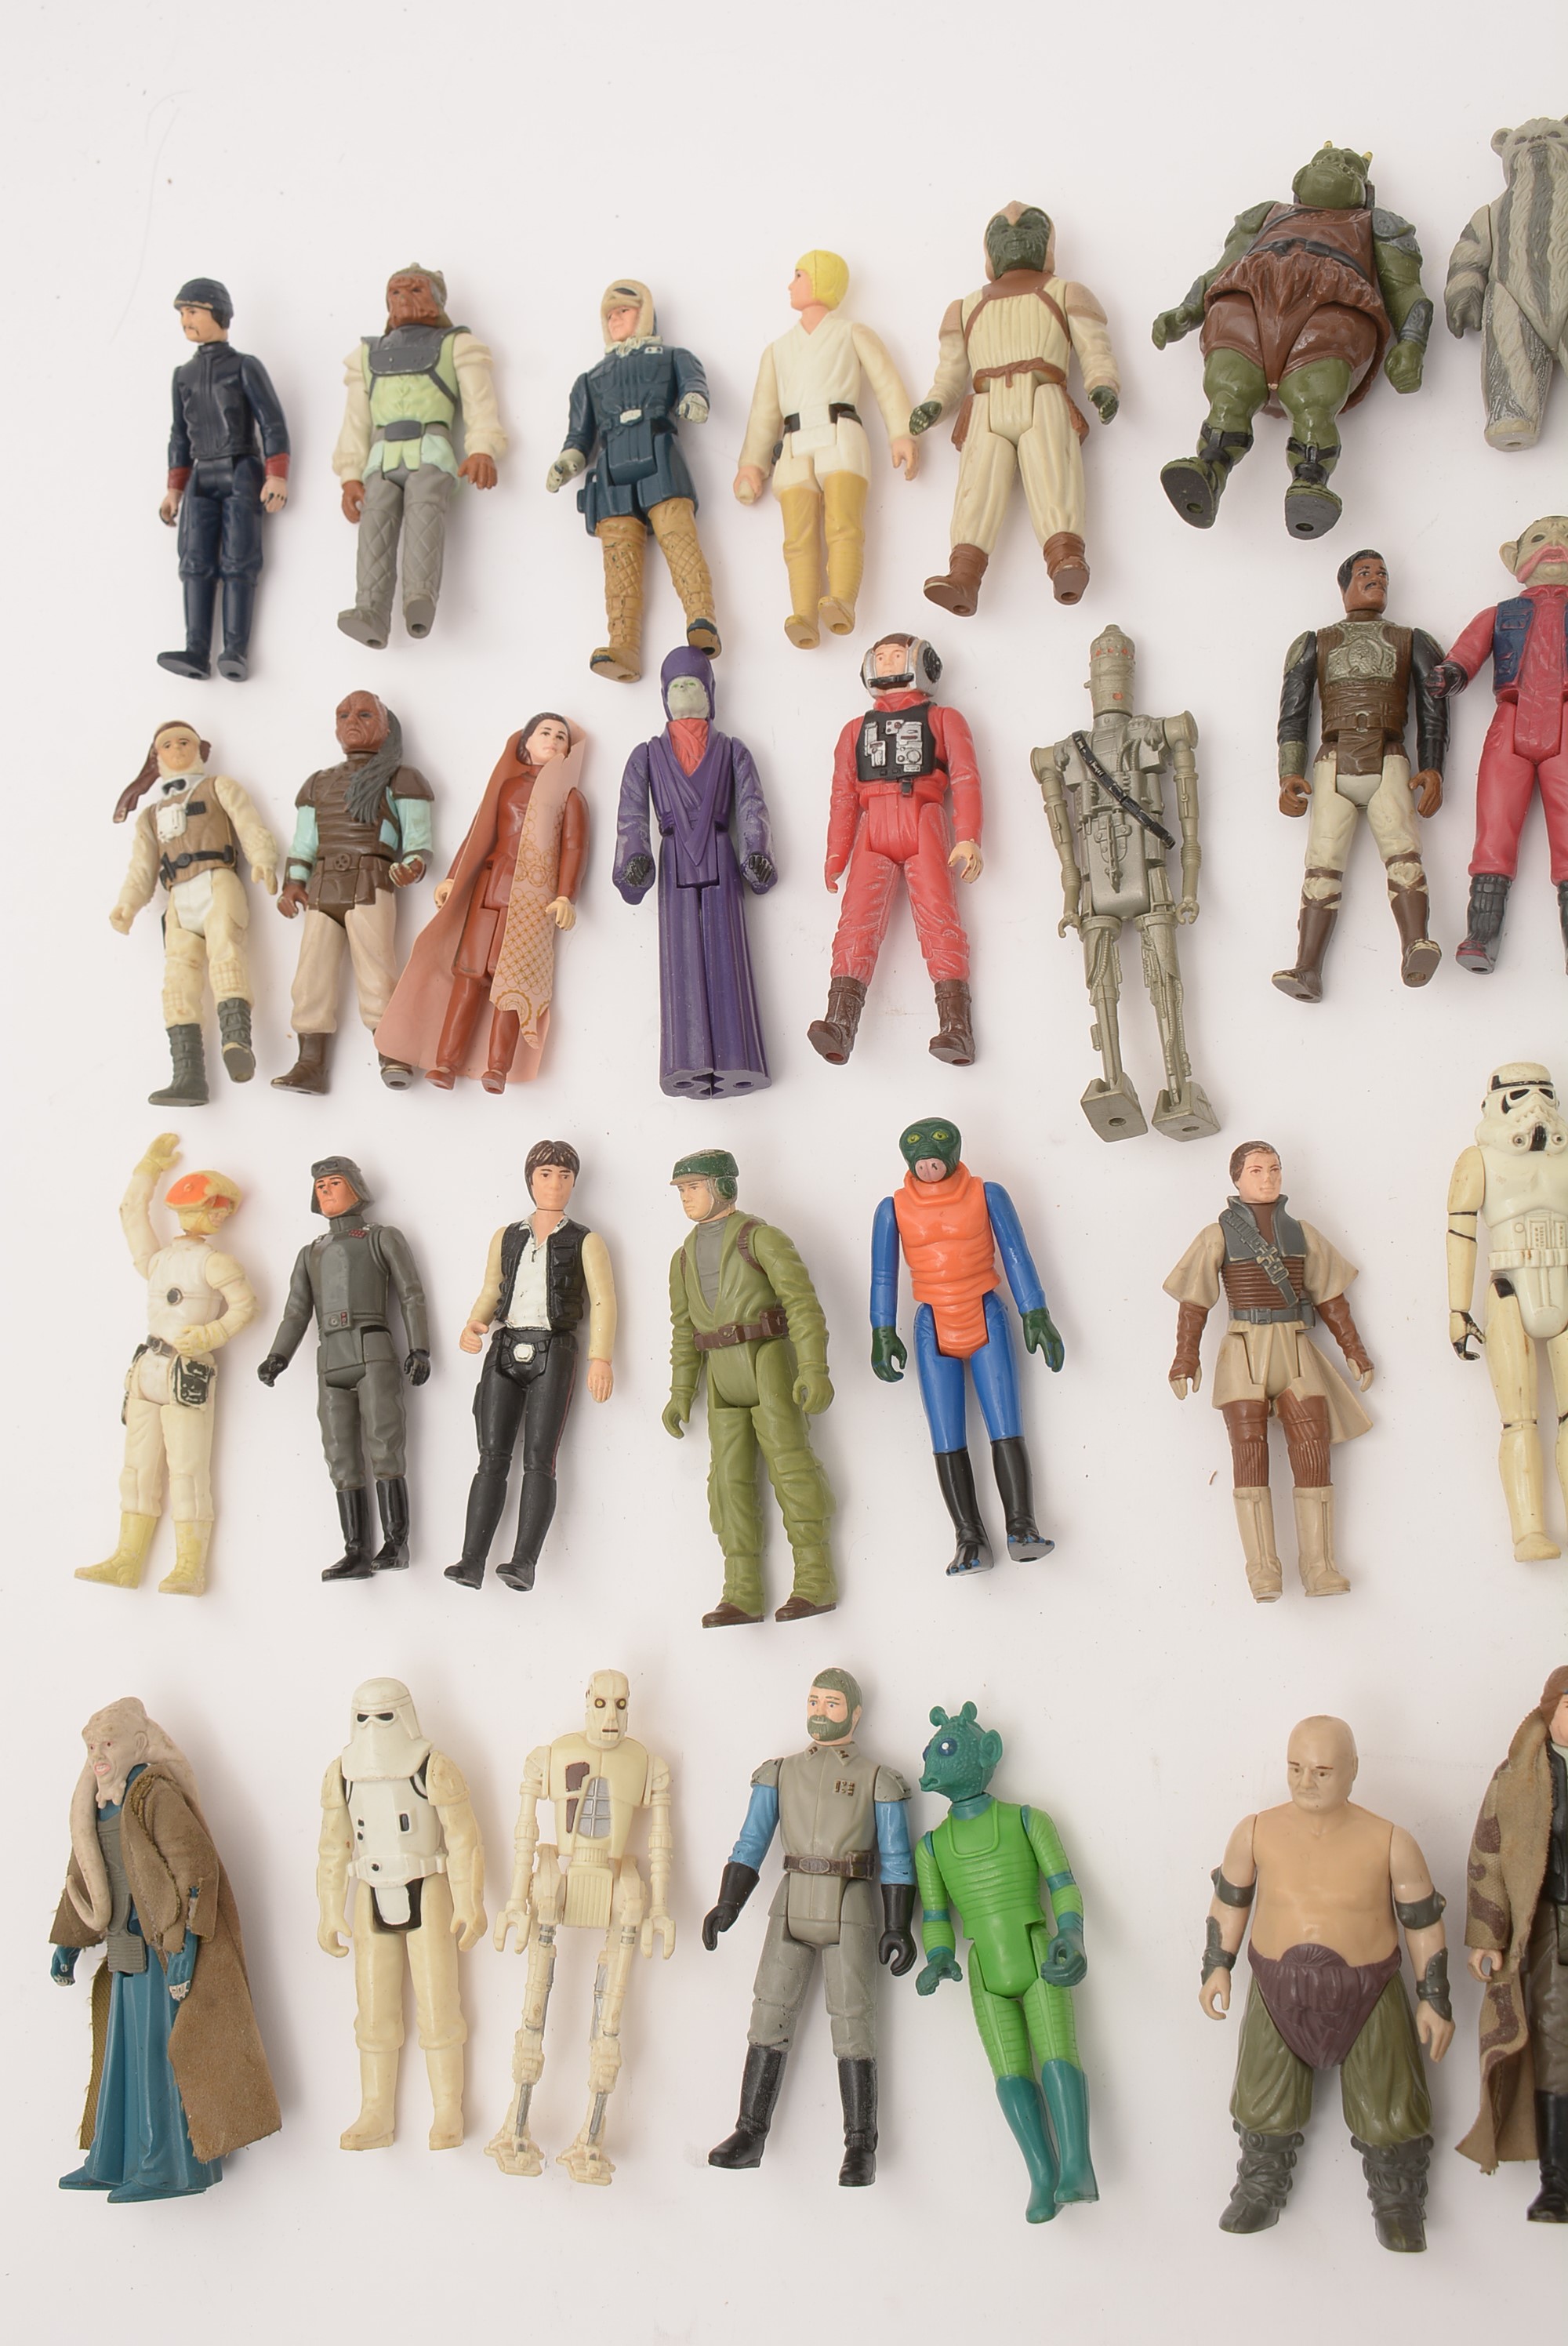 Sealed Kenner and Palitoy Star Wars figures and vintage toys in Tamworth  auction – Richard Winterton Auctioneers